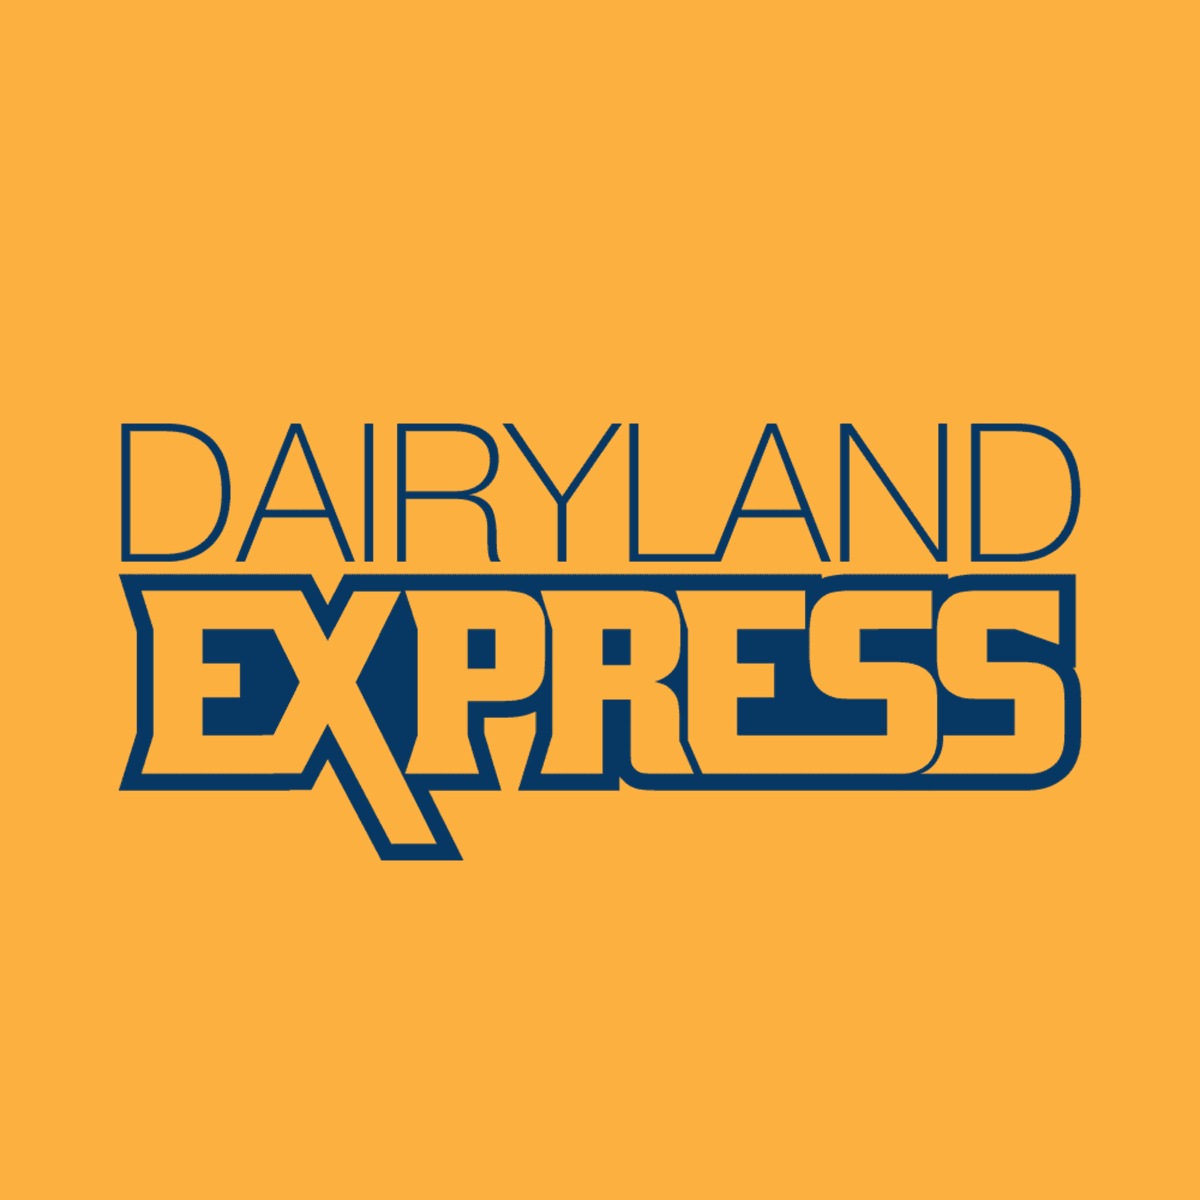 Green Bay Packers news, photos, and more - Page 566 of 566 - Dairyland Express: The latest Green Bay Packers news, rumors, GIFs, predictions, and more from Dairyland Express. https://t.co/ll4MyeGsm6 https://t.co/Aq8HyP6CmS